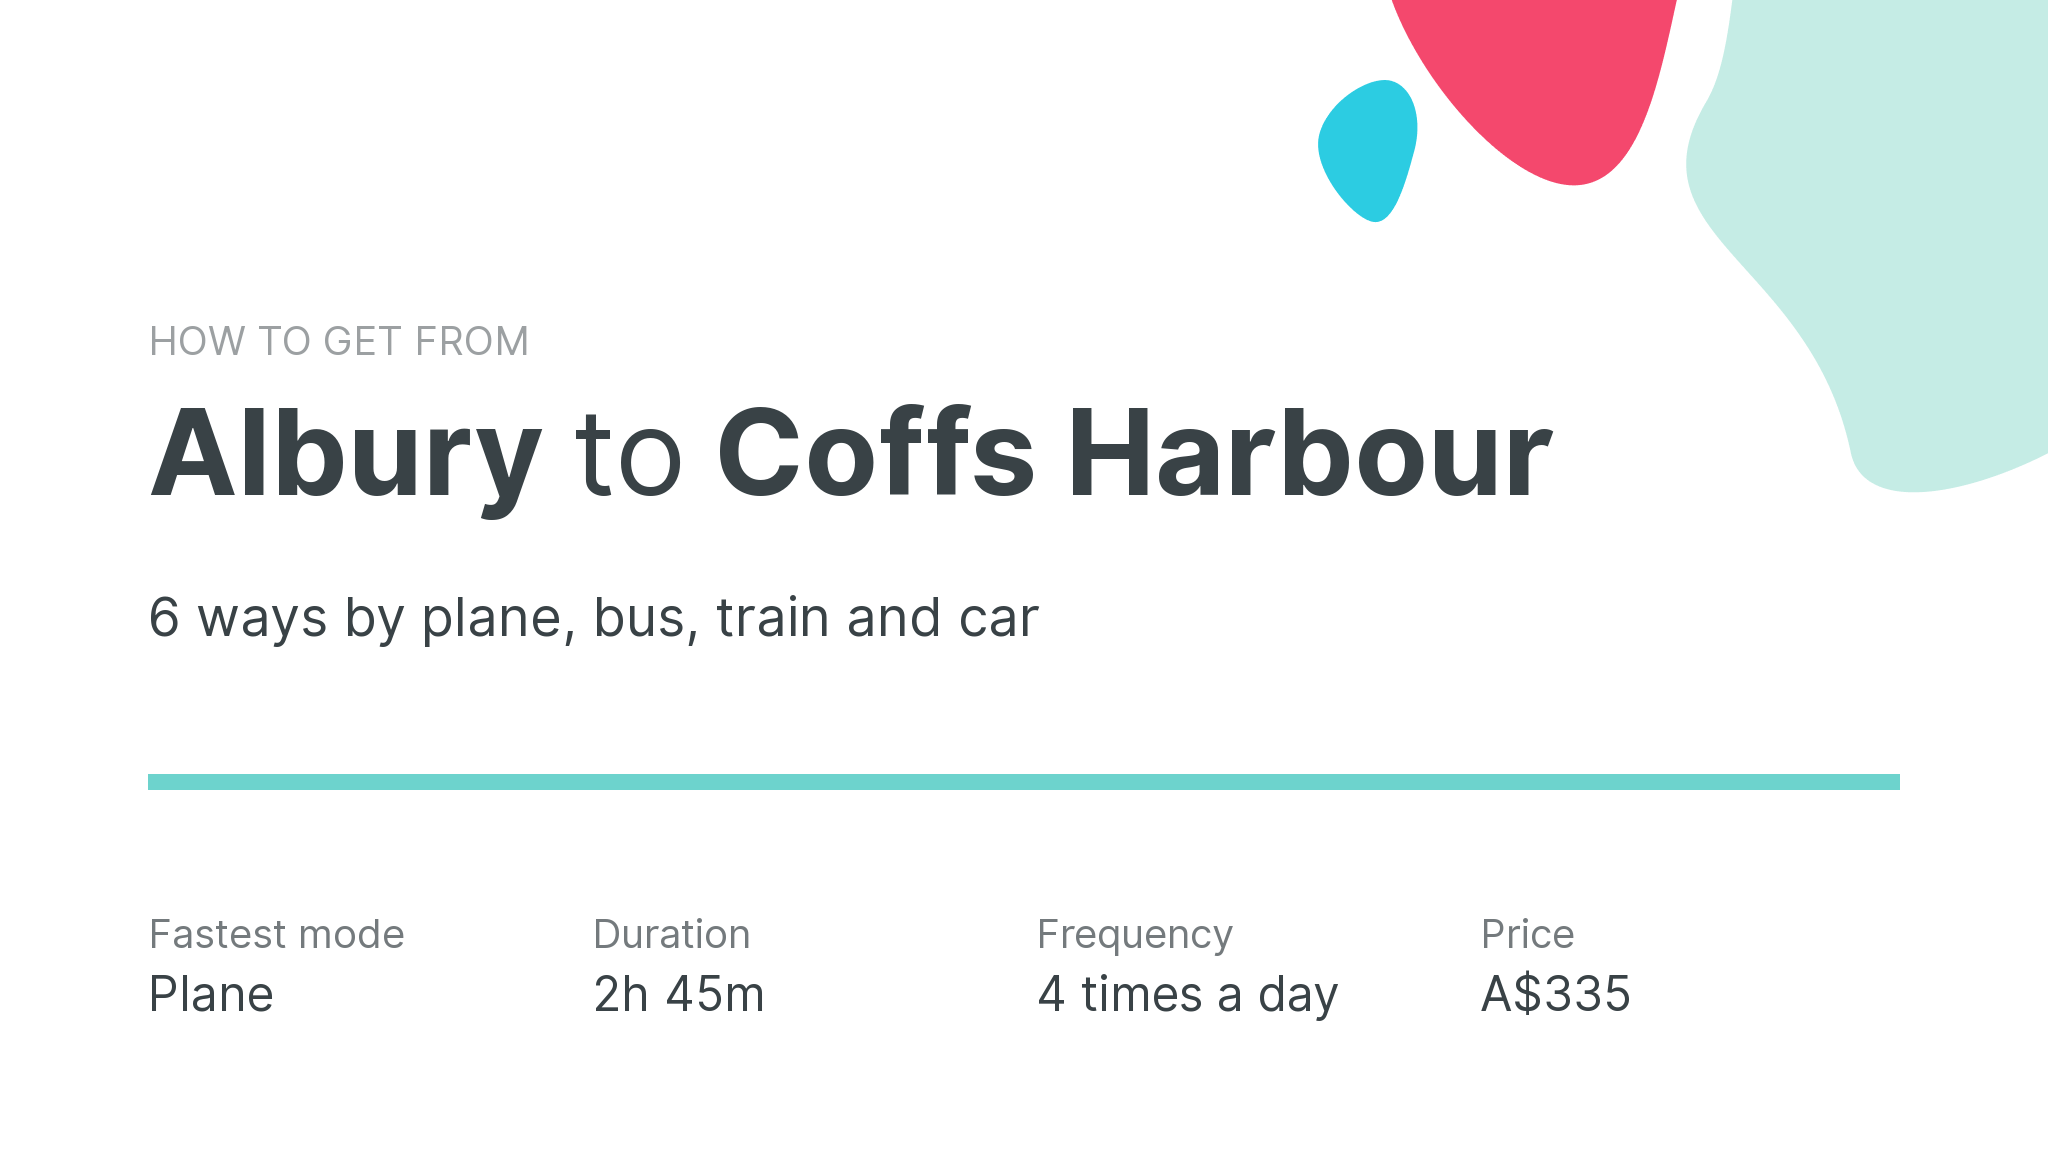 How do I get from Albury to Coffs Harbour